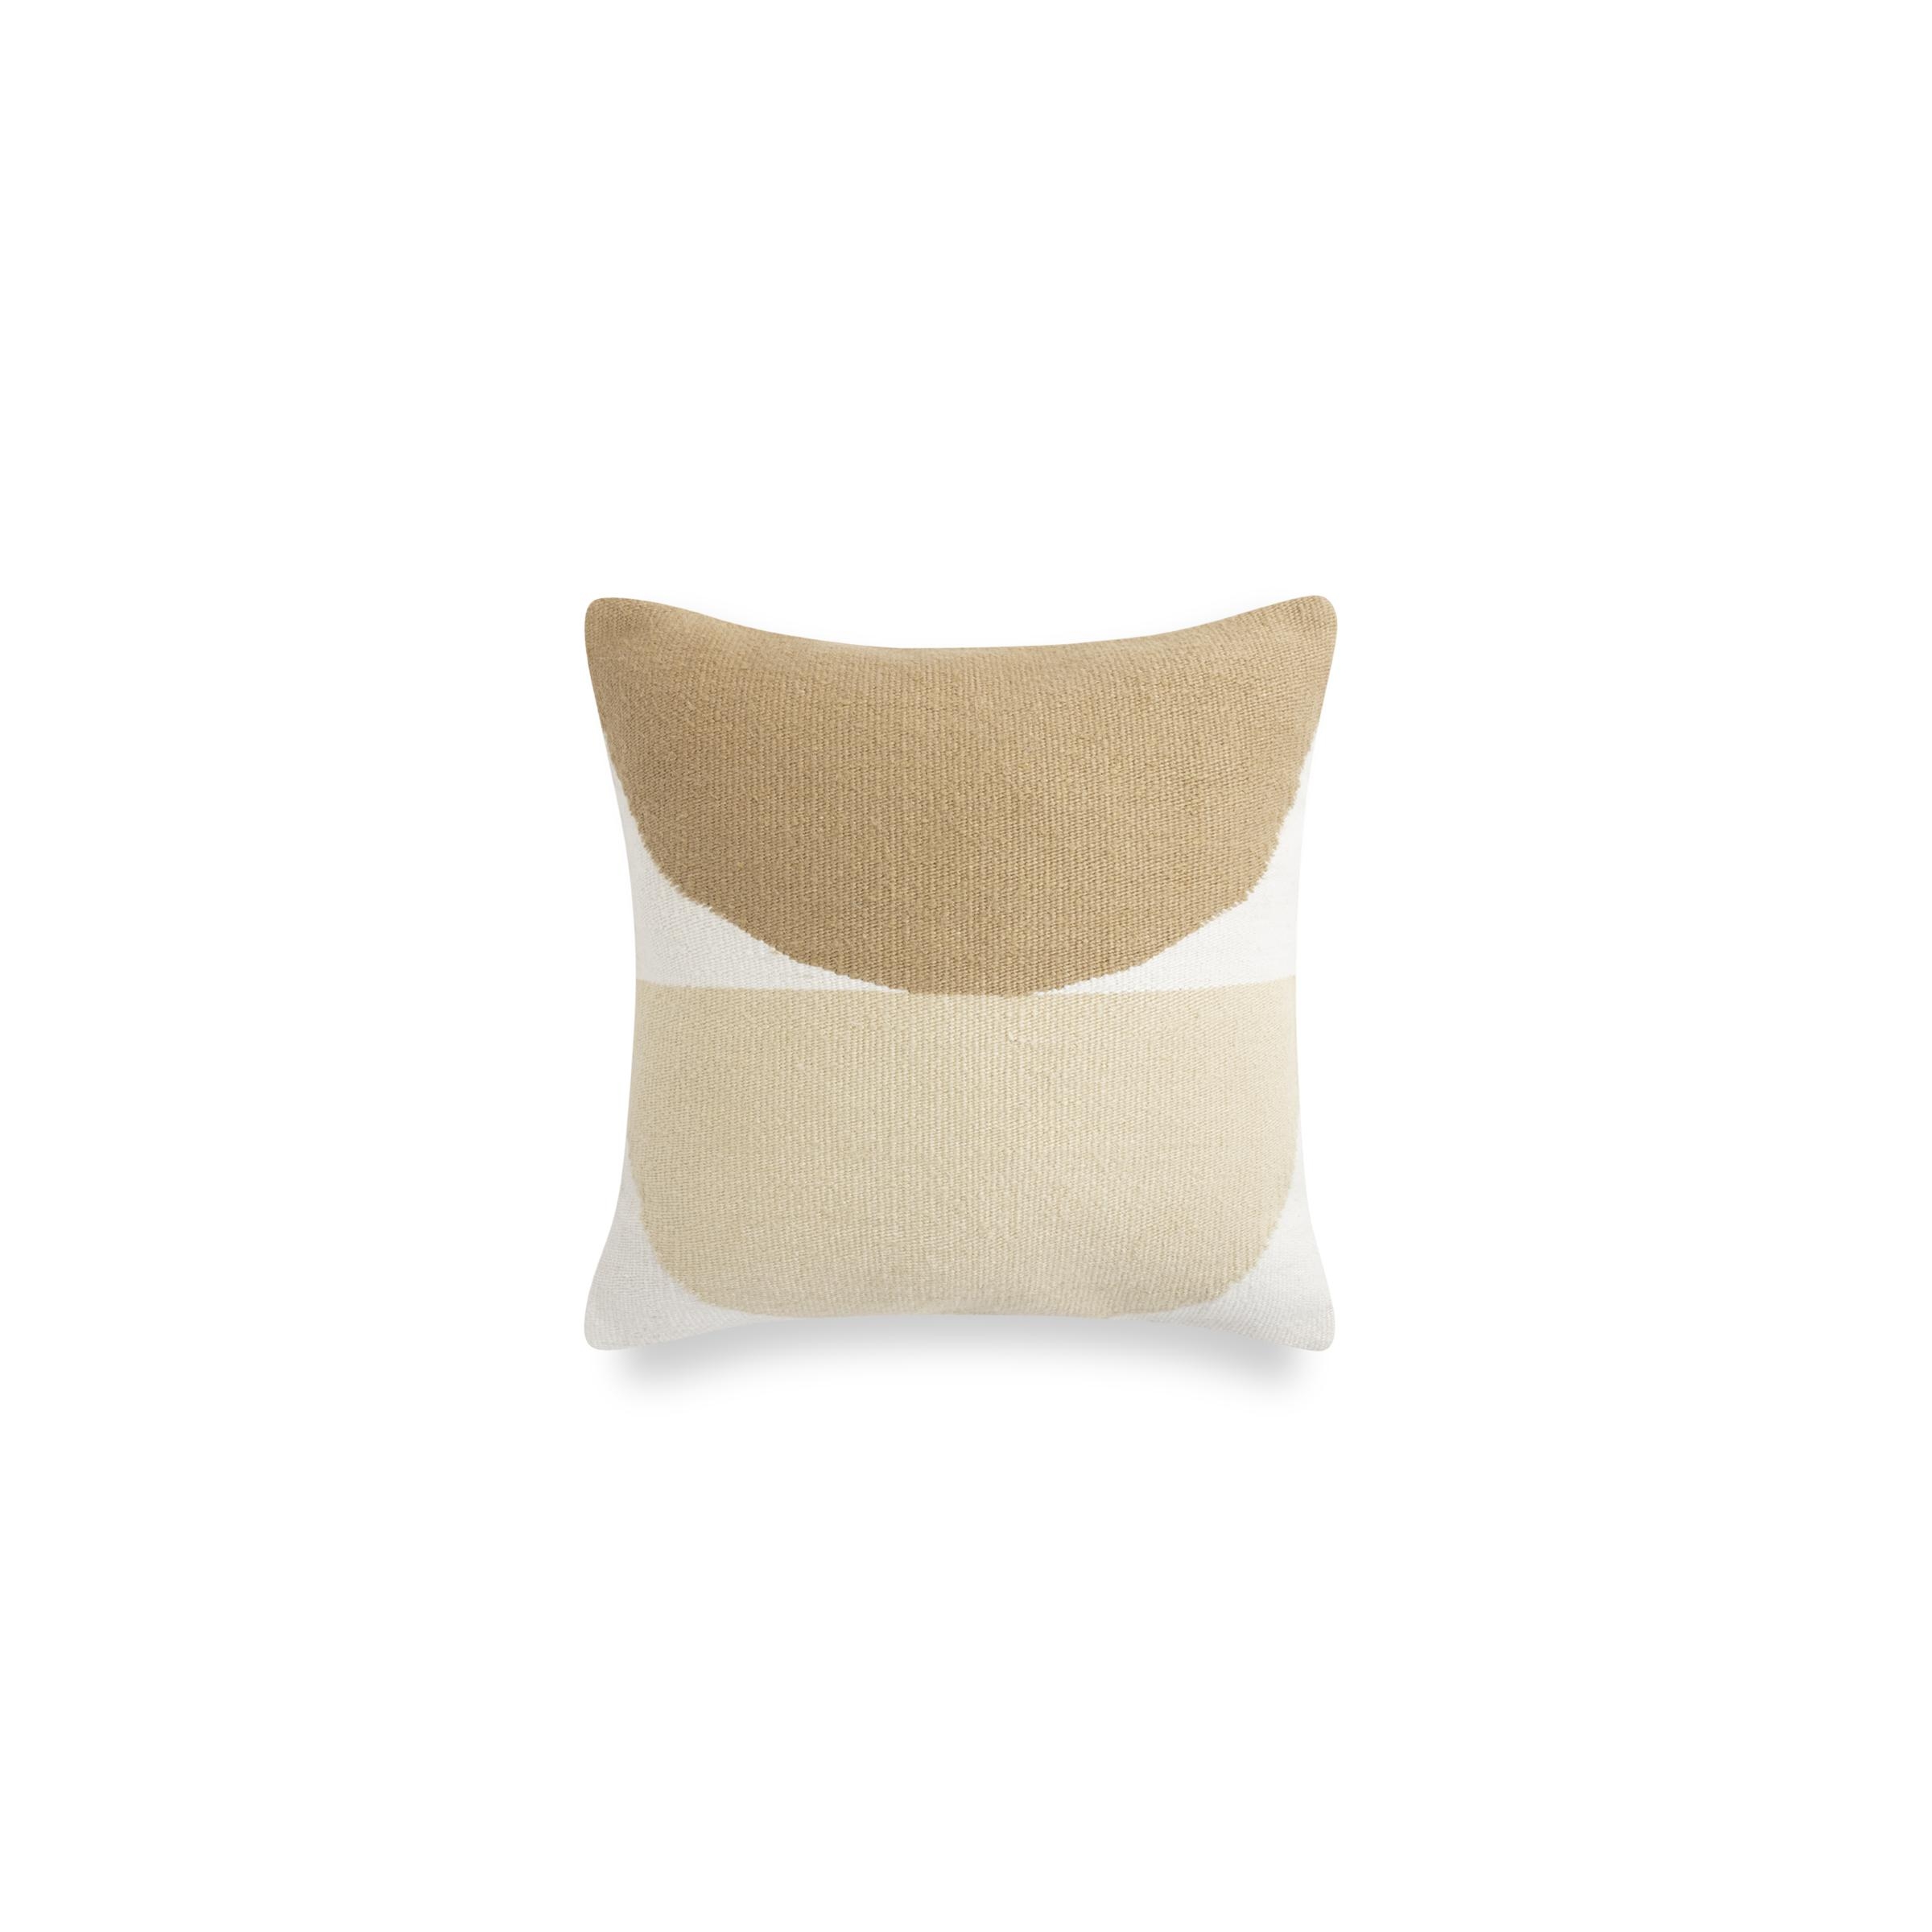 Hand-tufted Geometric Circles Pillow Cover Sand in Beige - Image 0